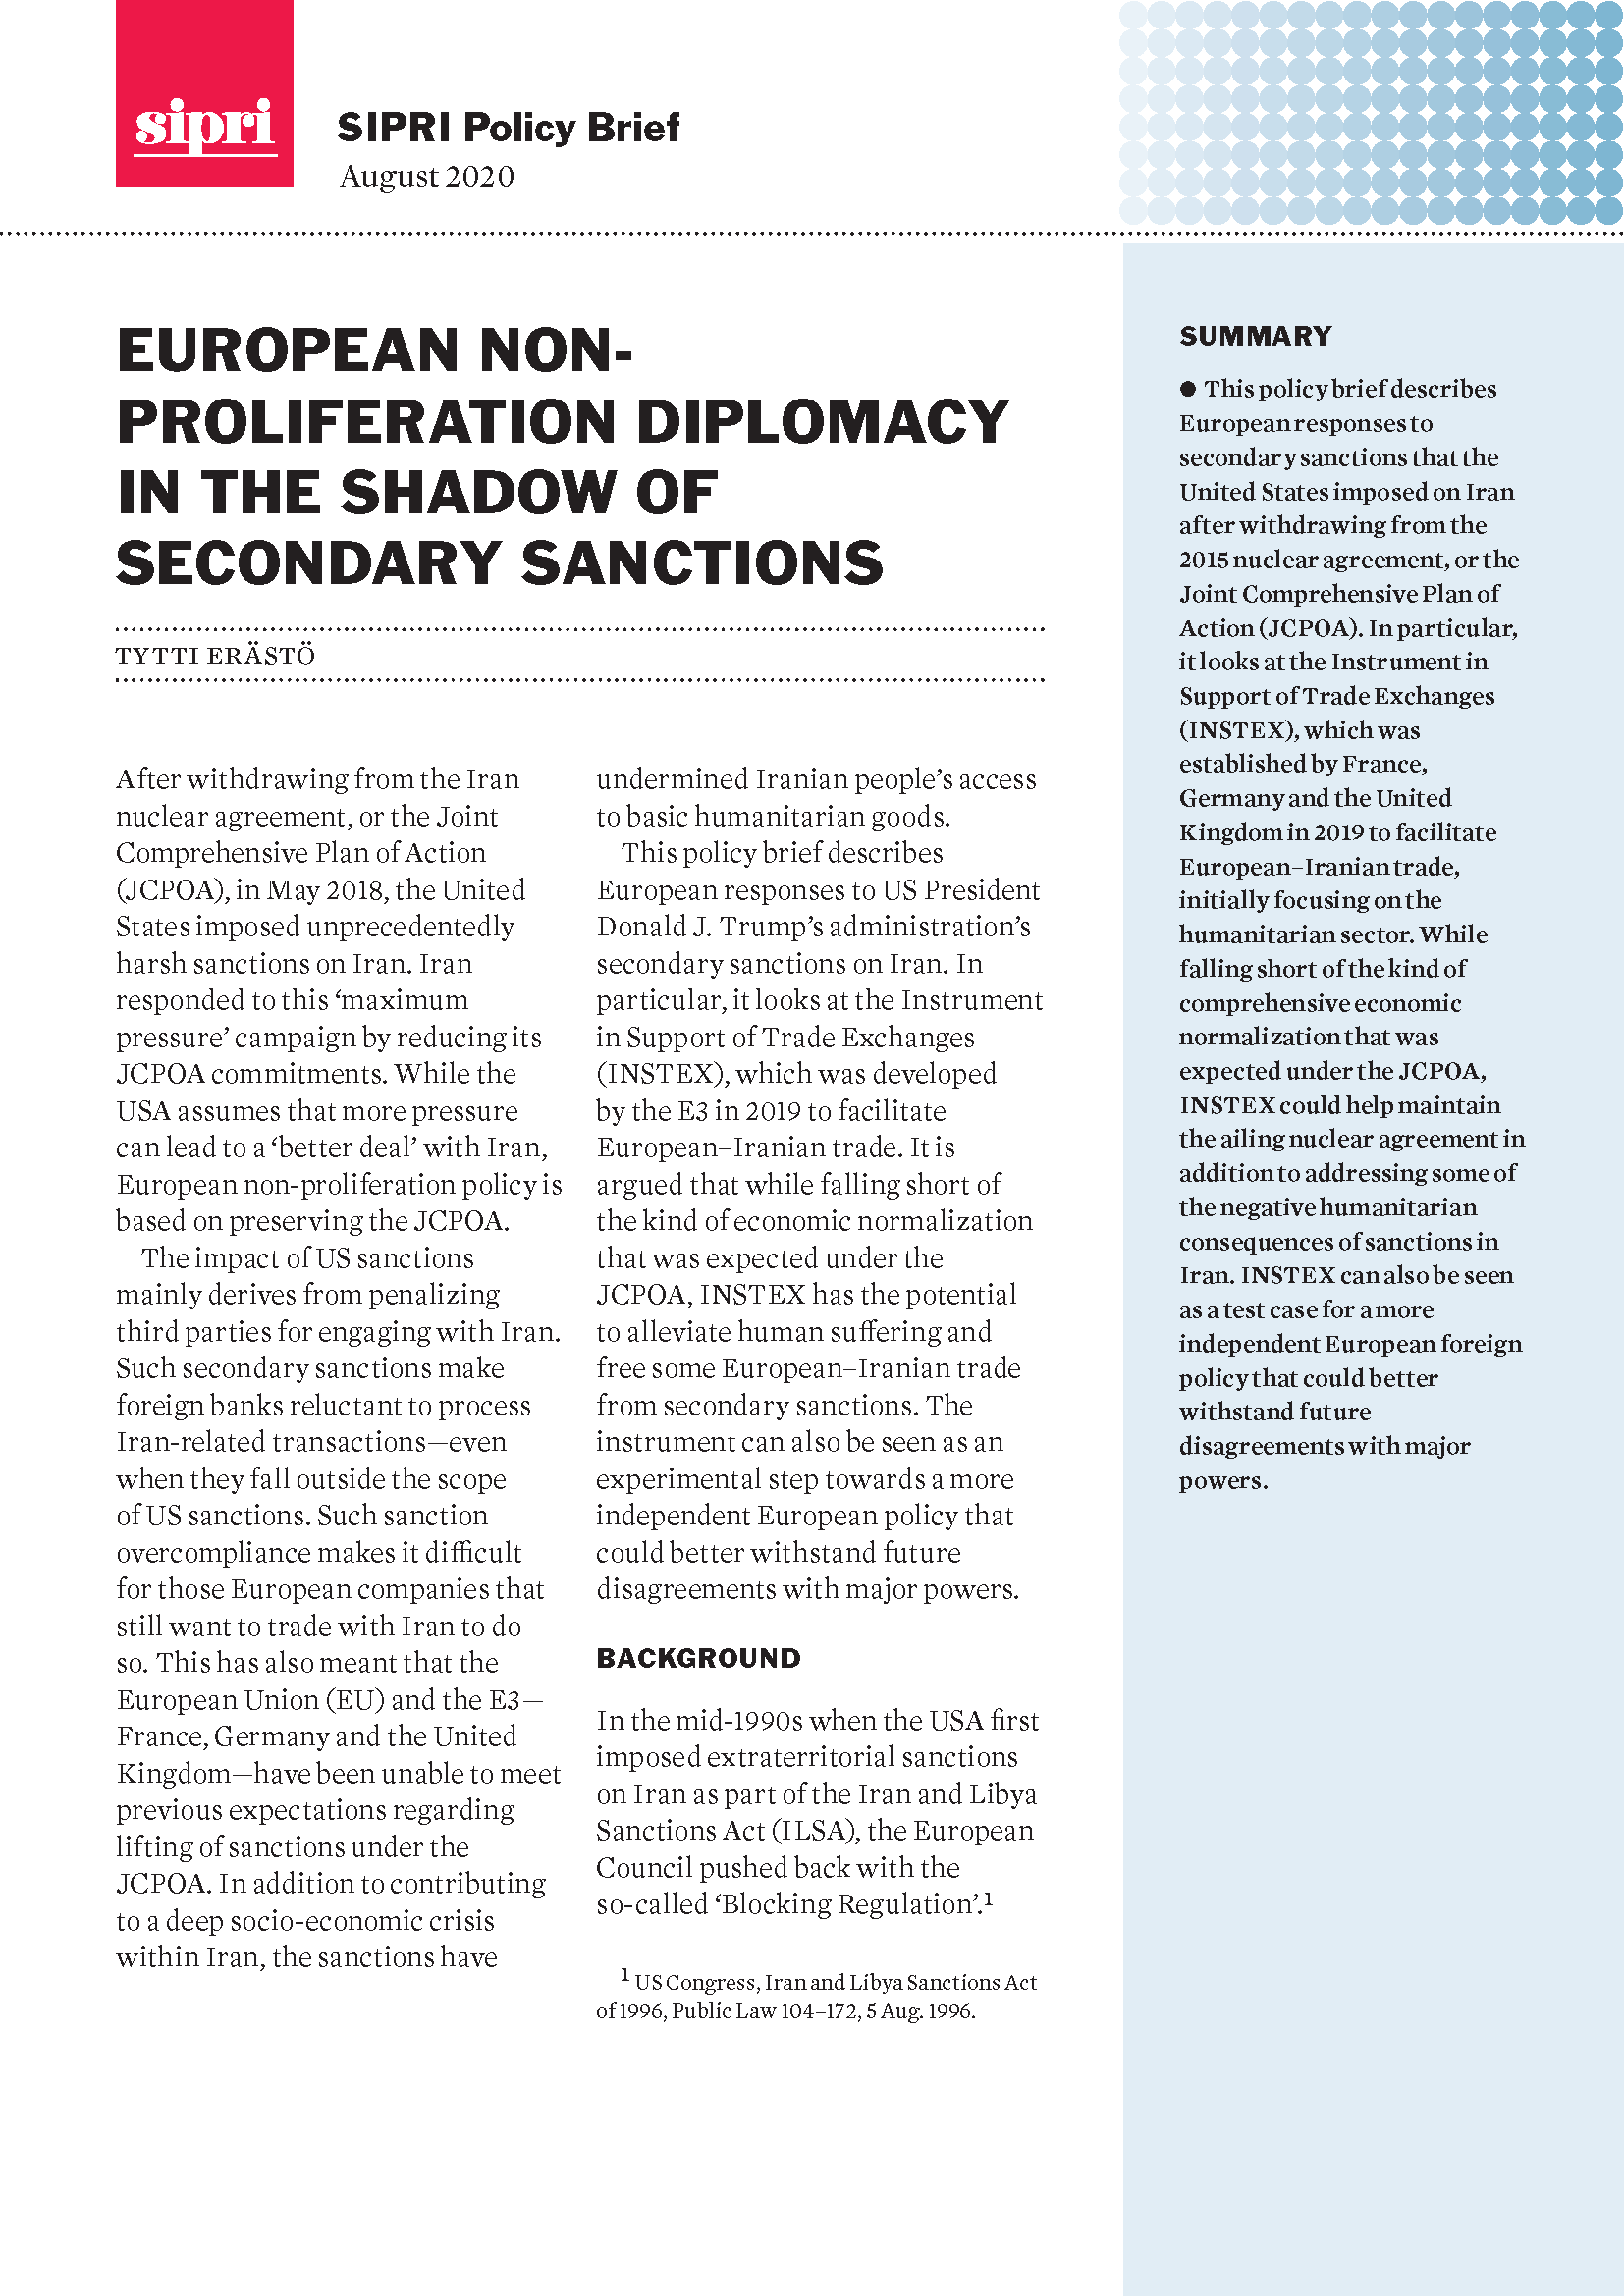 European Non-proliferation Diplomacy in the Shadow of Secondary